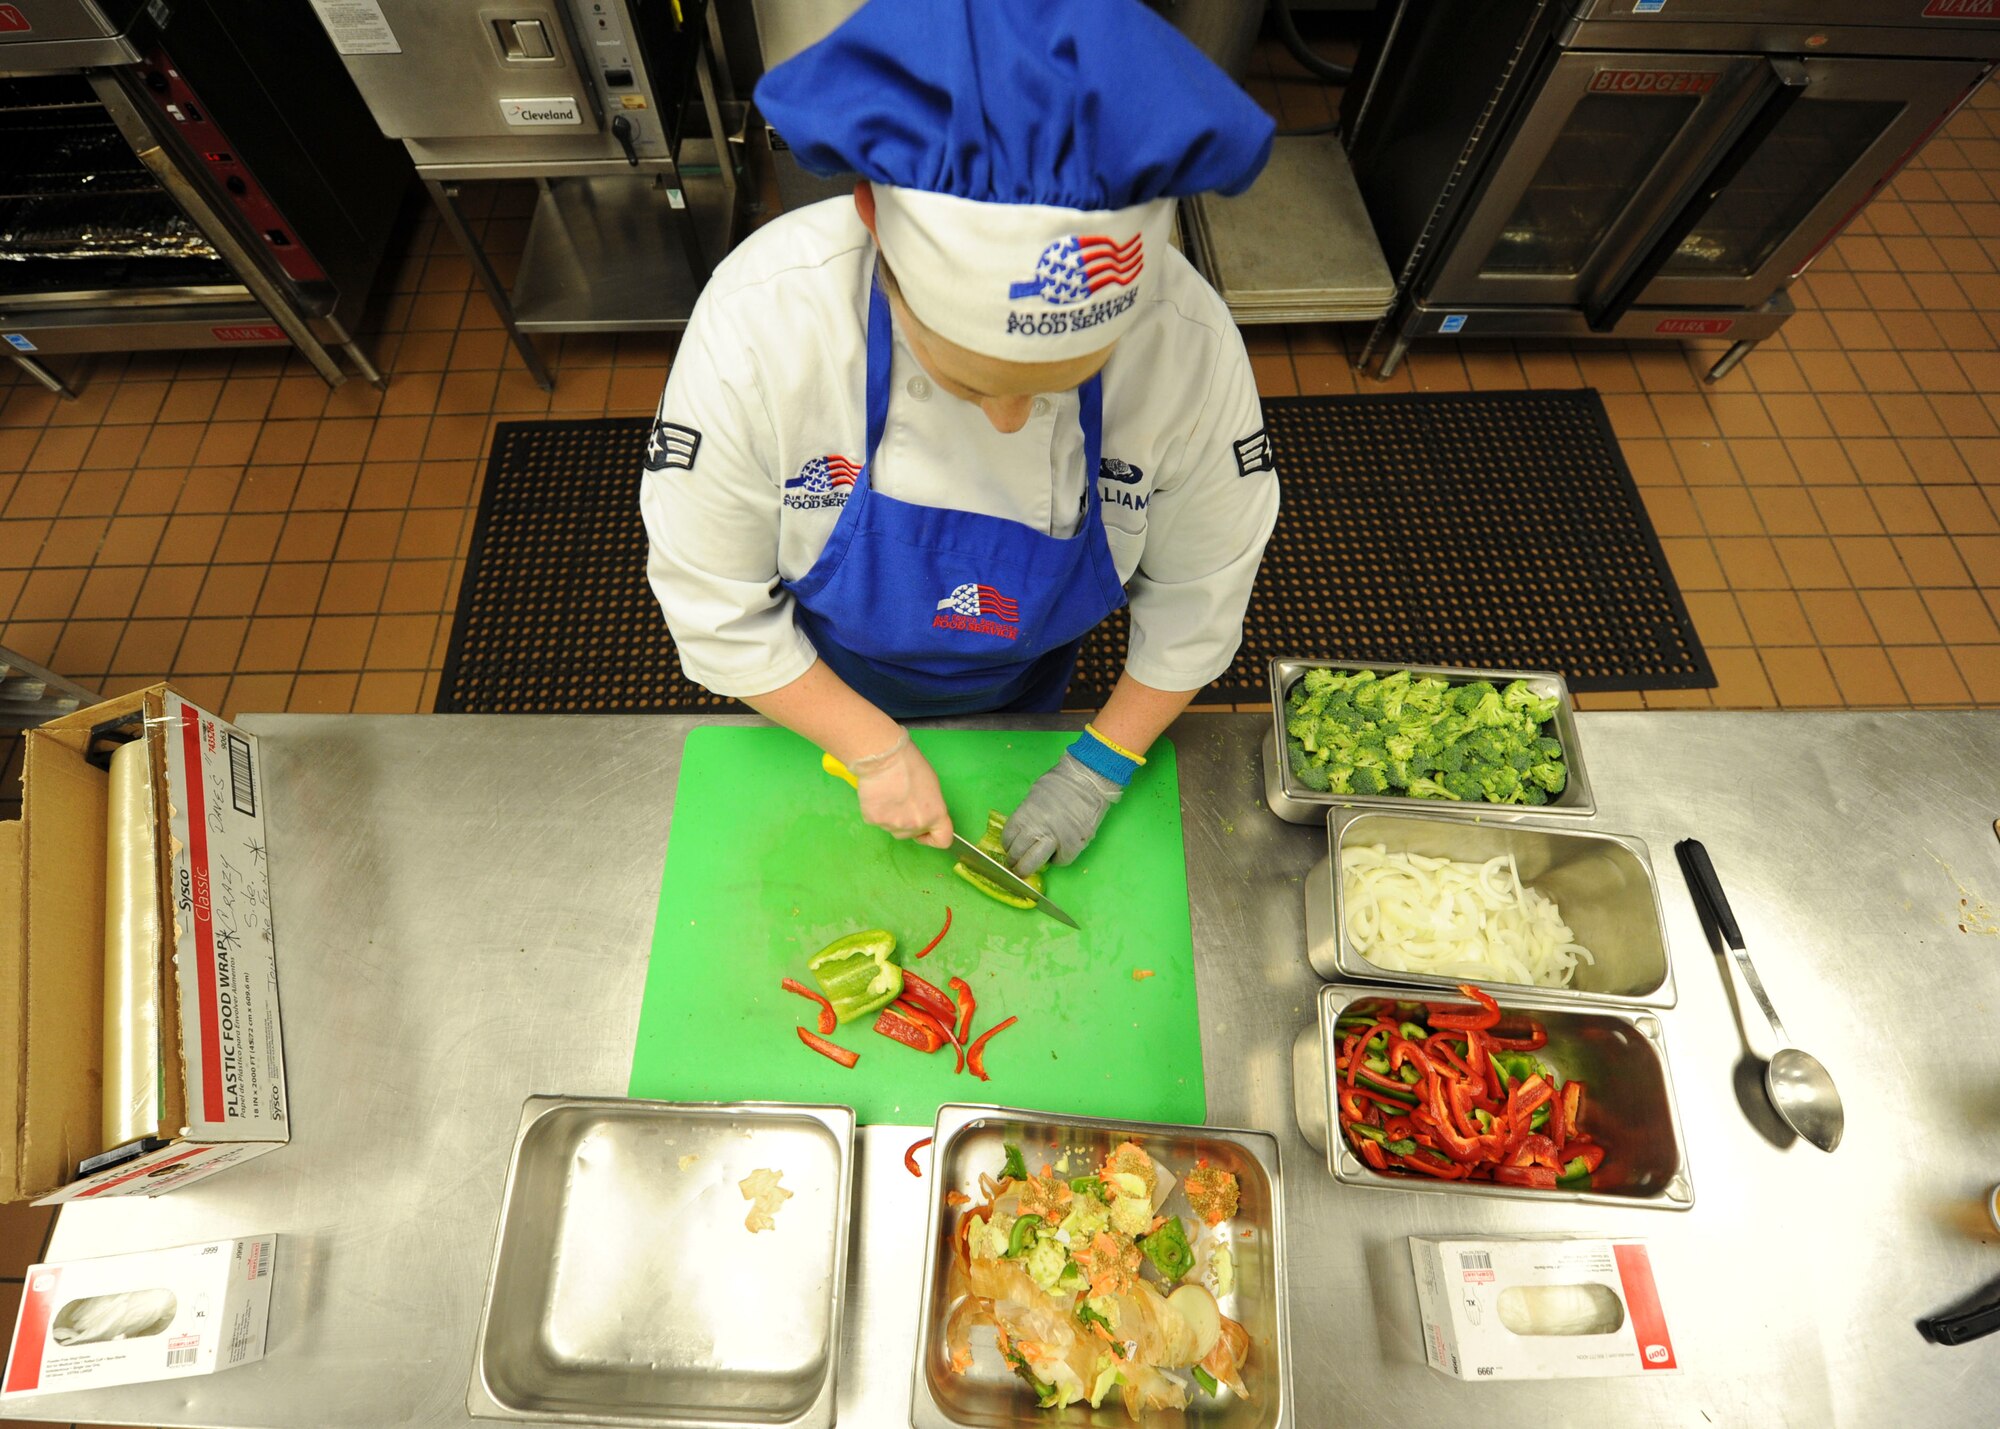 Senior Airman Amanda Williams, a food service journeyman assigned to the 28th Force Support Squadron prepares fresh vegetables for the lunch rush at Ellsworth Air Force Base, S.D., Oct. 6, 2016. Ellsworth recently became the Air Force Global Strike Command finalist for the John L. Hennessy award, which recognizes the best dining facility in the Air Force. (U.S. Air Force photo by Airman 1st Class Randahl J. Jenson)